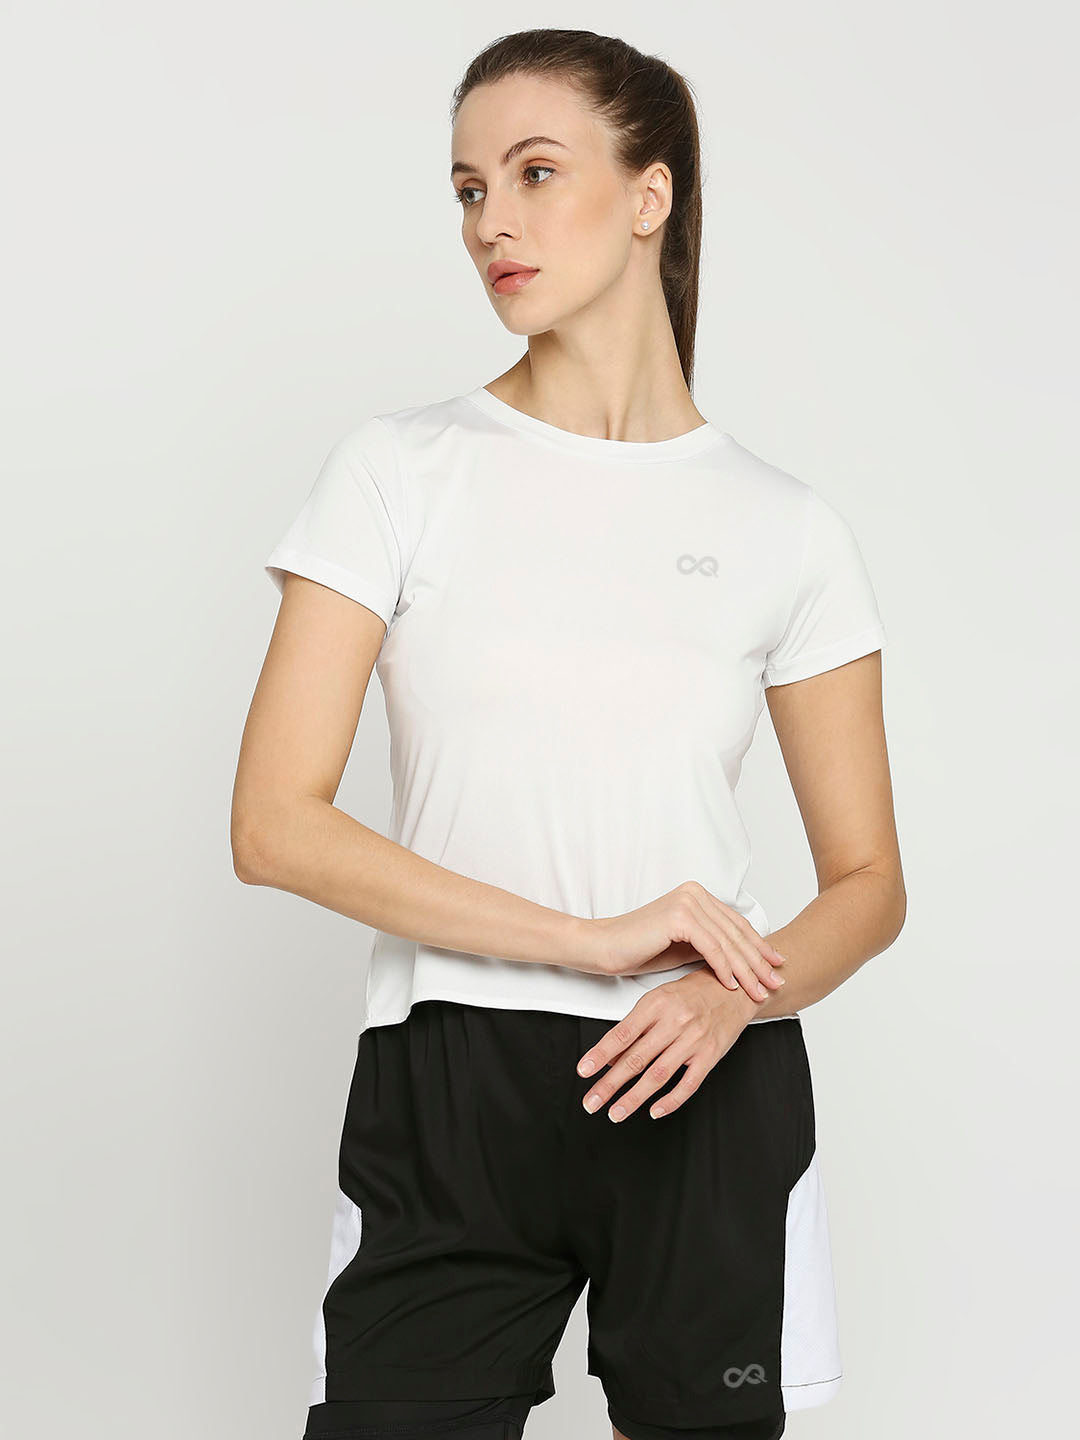 Women's White Sports T-Shirt with Back Tie Up - Stay Stylish and  Comfortable